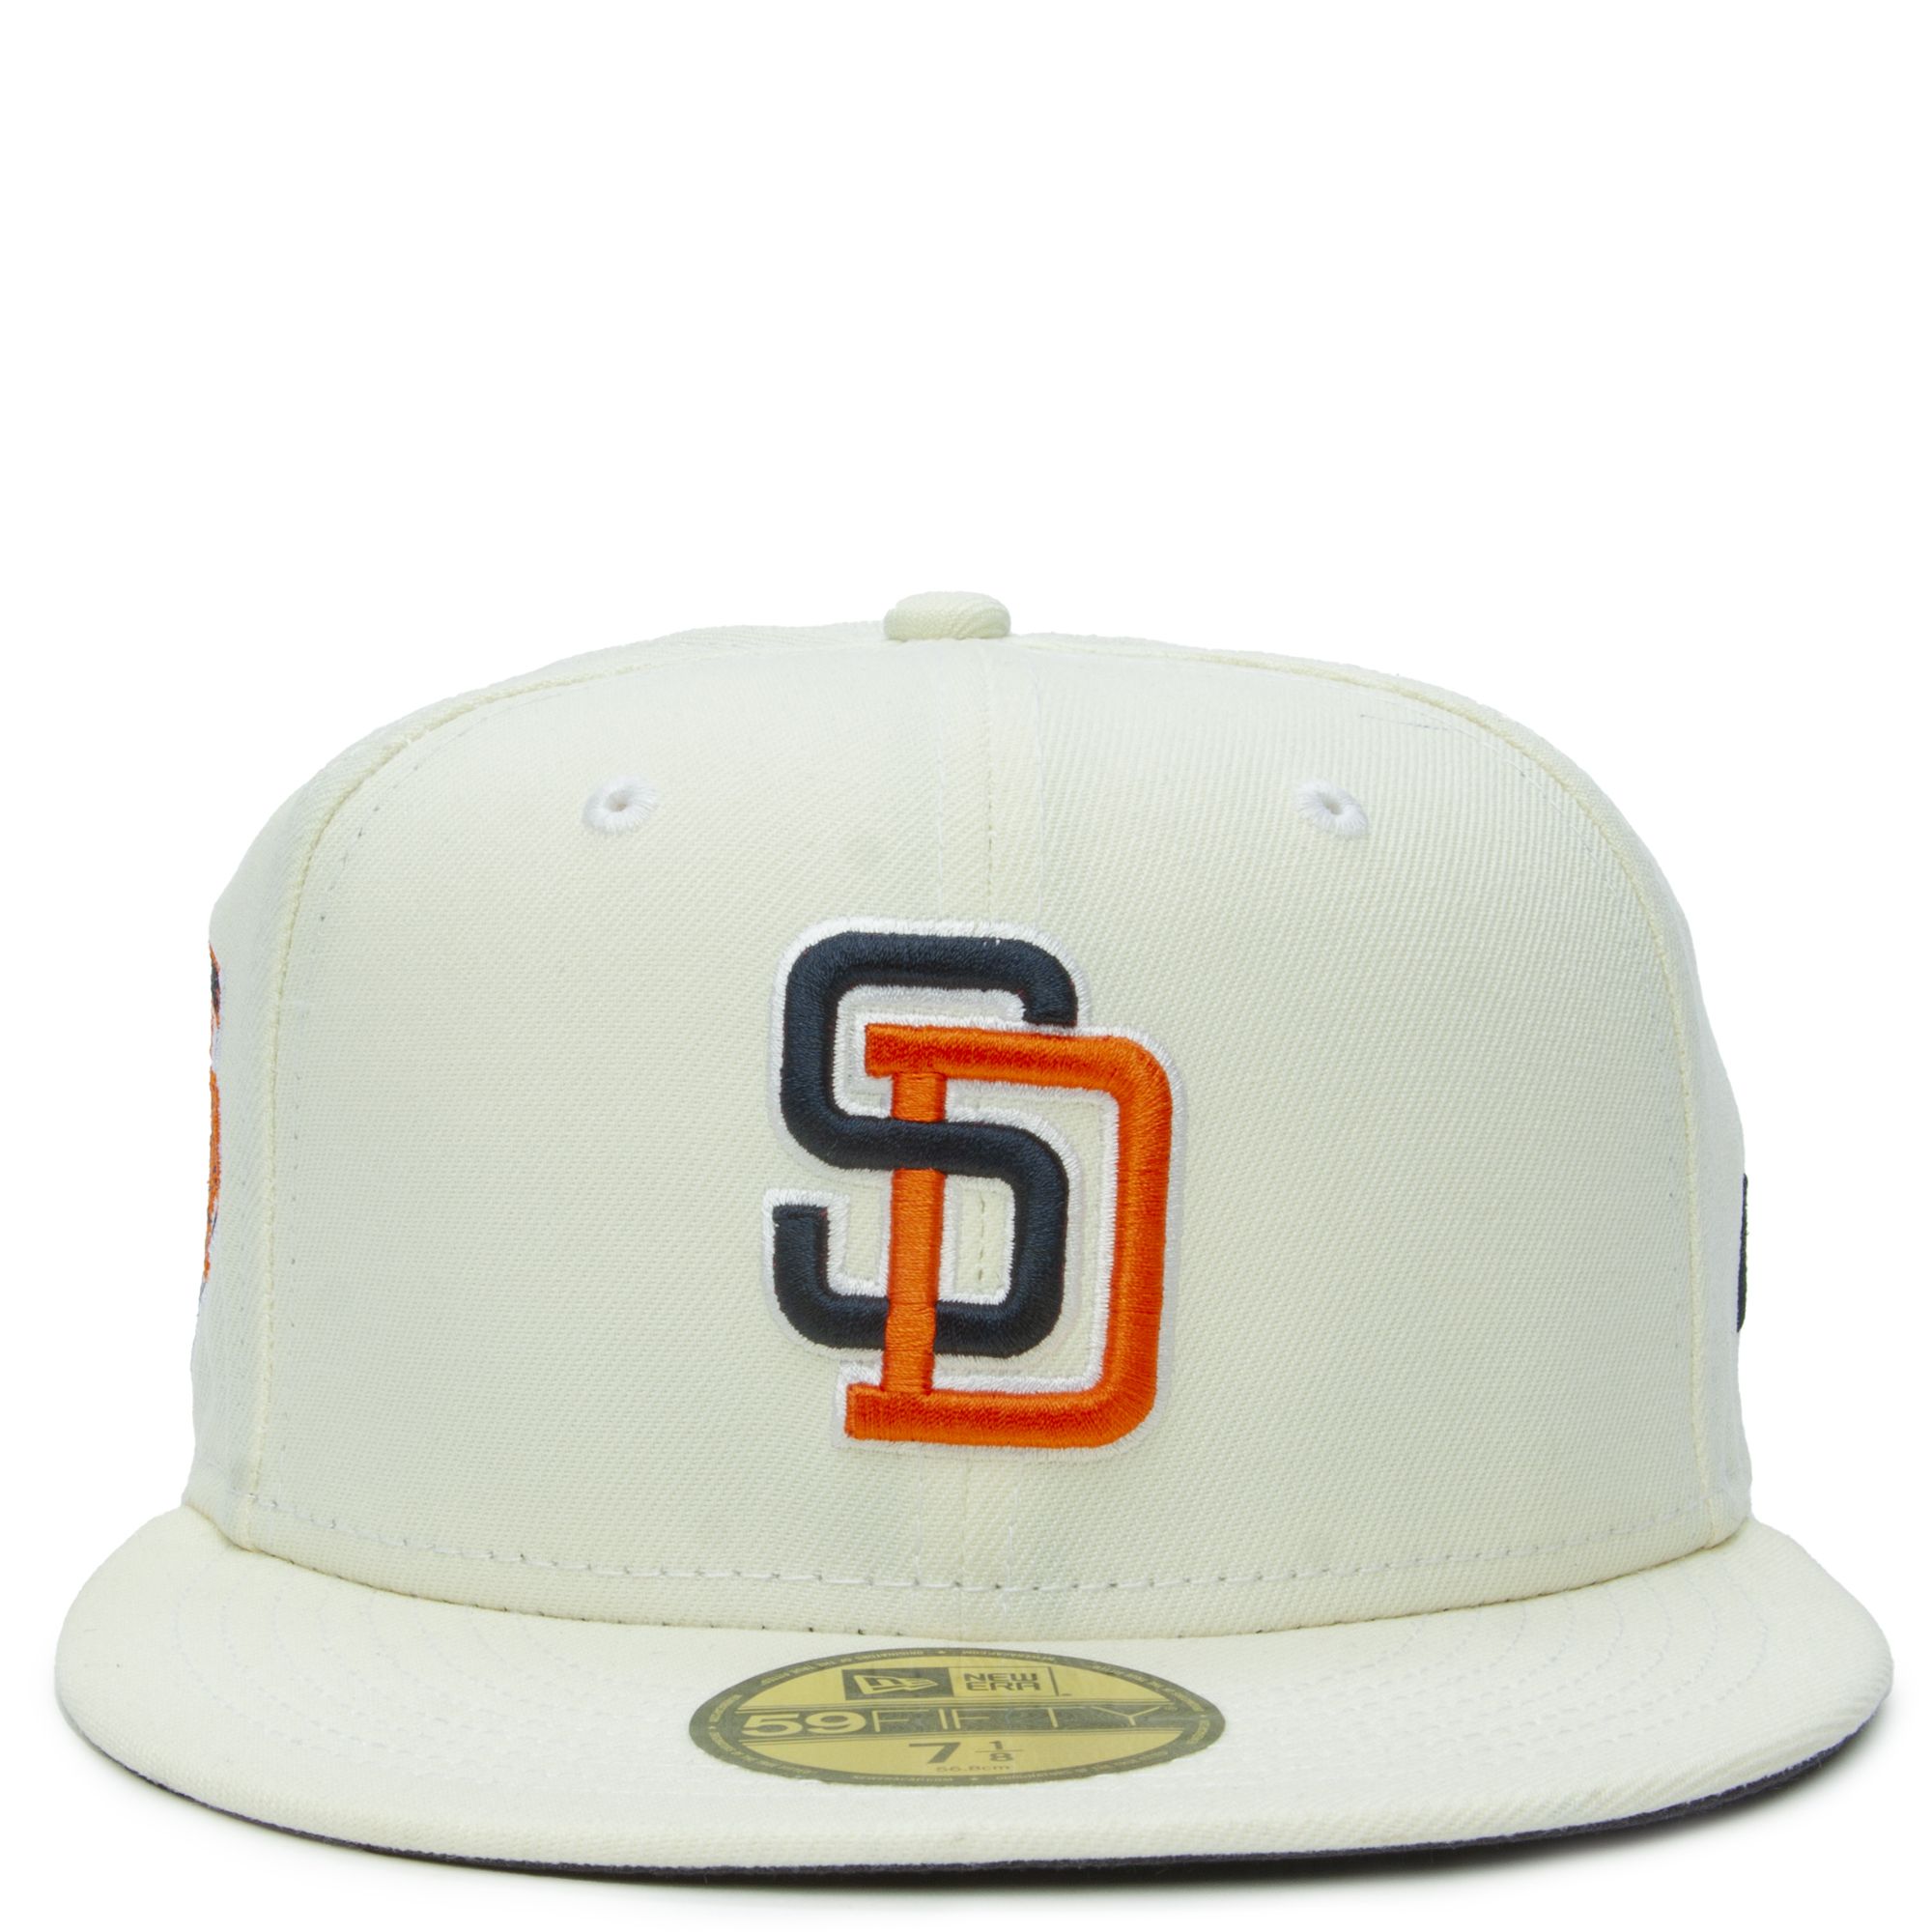 Men's New Era Khaki San Diego Padres 59FIFTY Fitted Hat